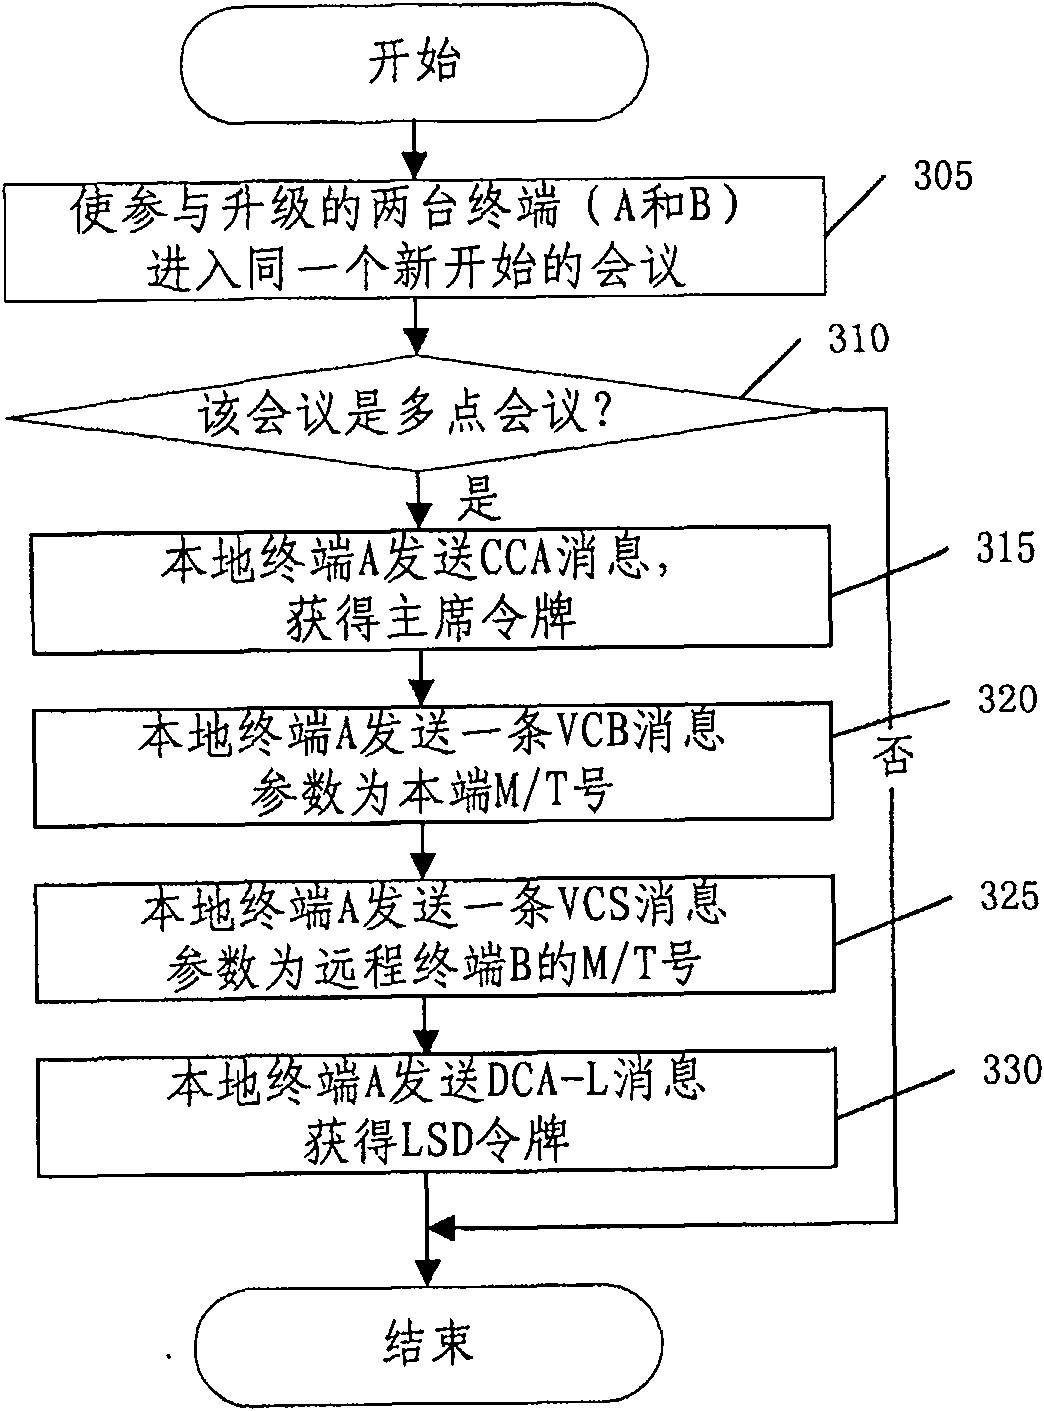 Method for upgrading software of remote conference television terminal